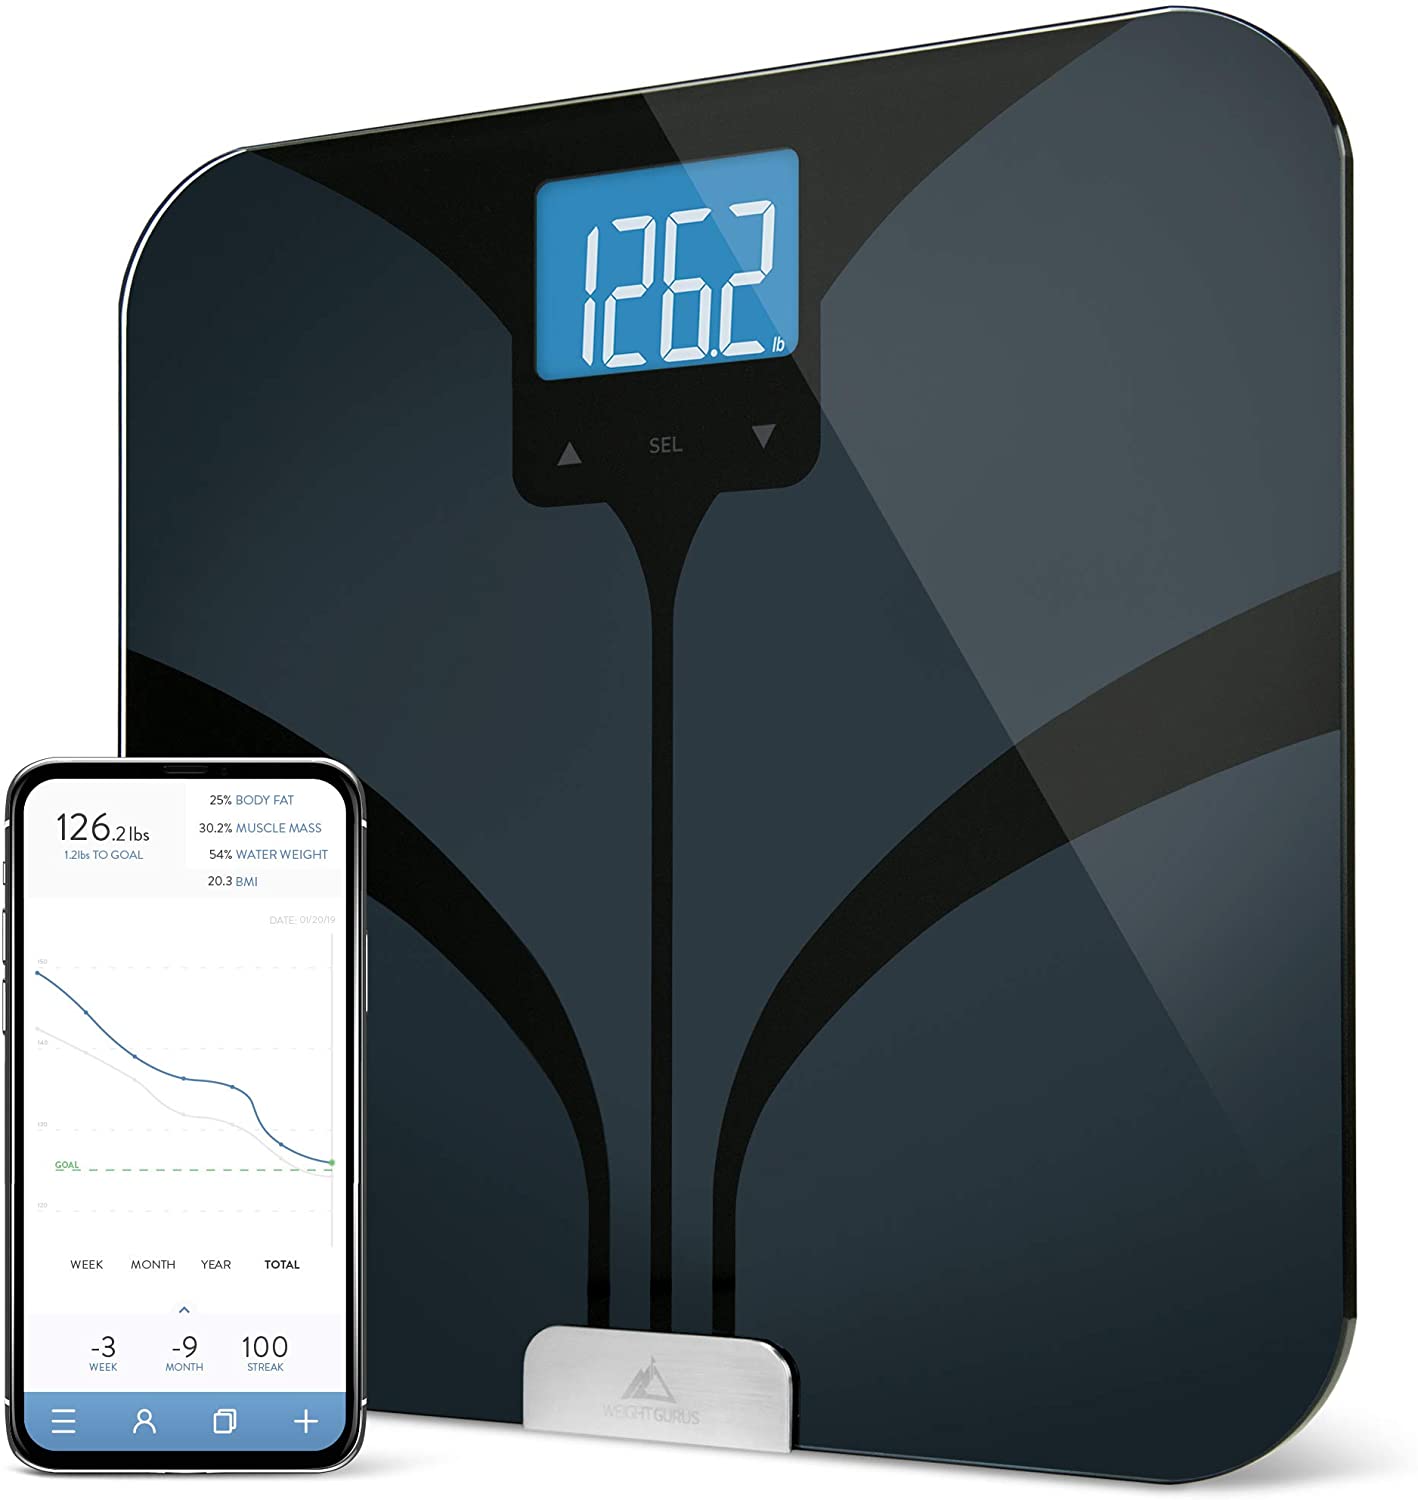 Greater Goods Bluetooth Connected Bathroom Smart Scale, Measures & Tracks BMI, Lean Mass, Water Weight & Bone Mass, Extra-Large, Backlit LCD Screen, Auto-Calibration & Auto-Off - image 1 of 5